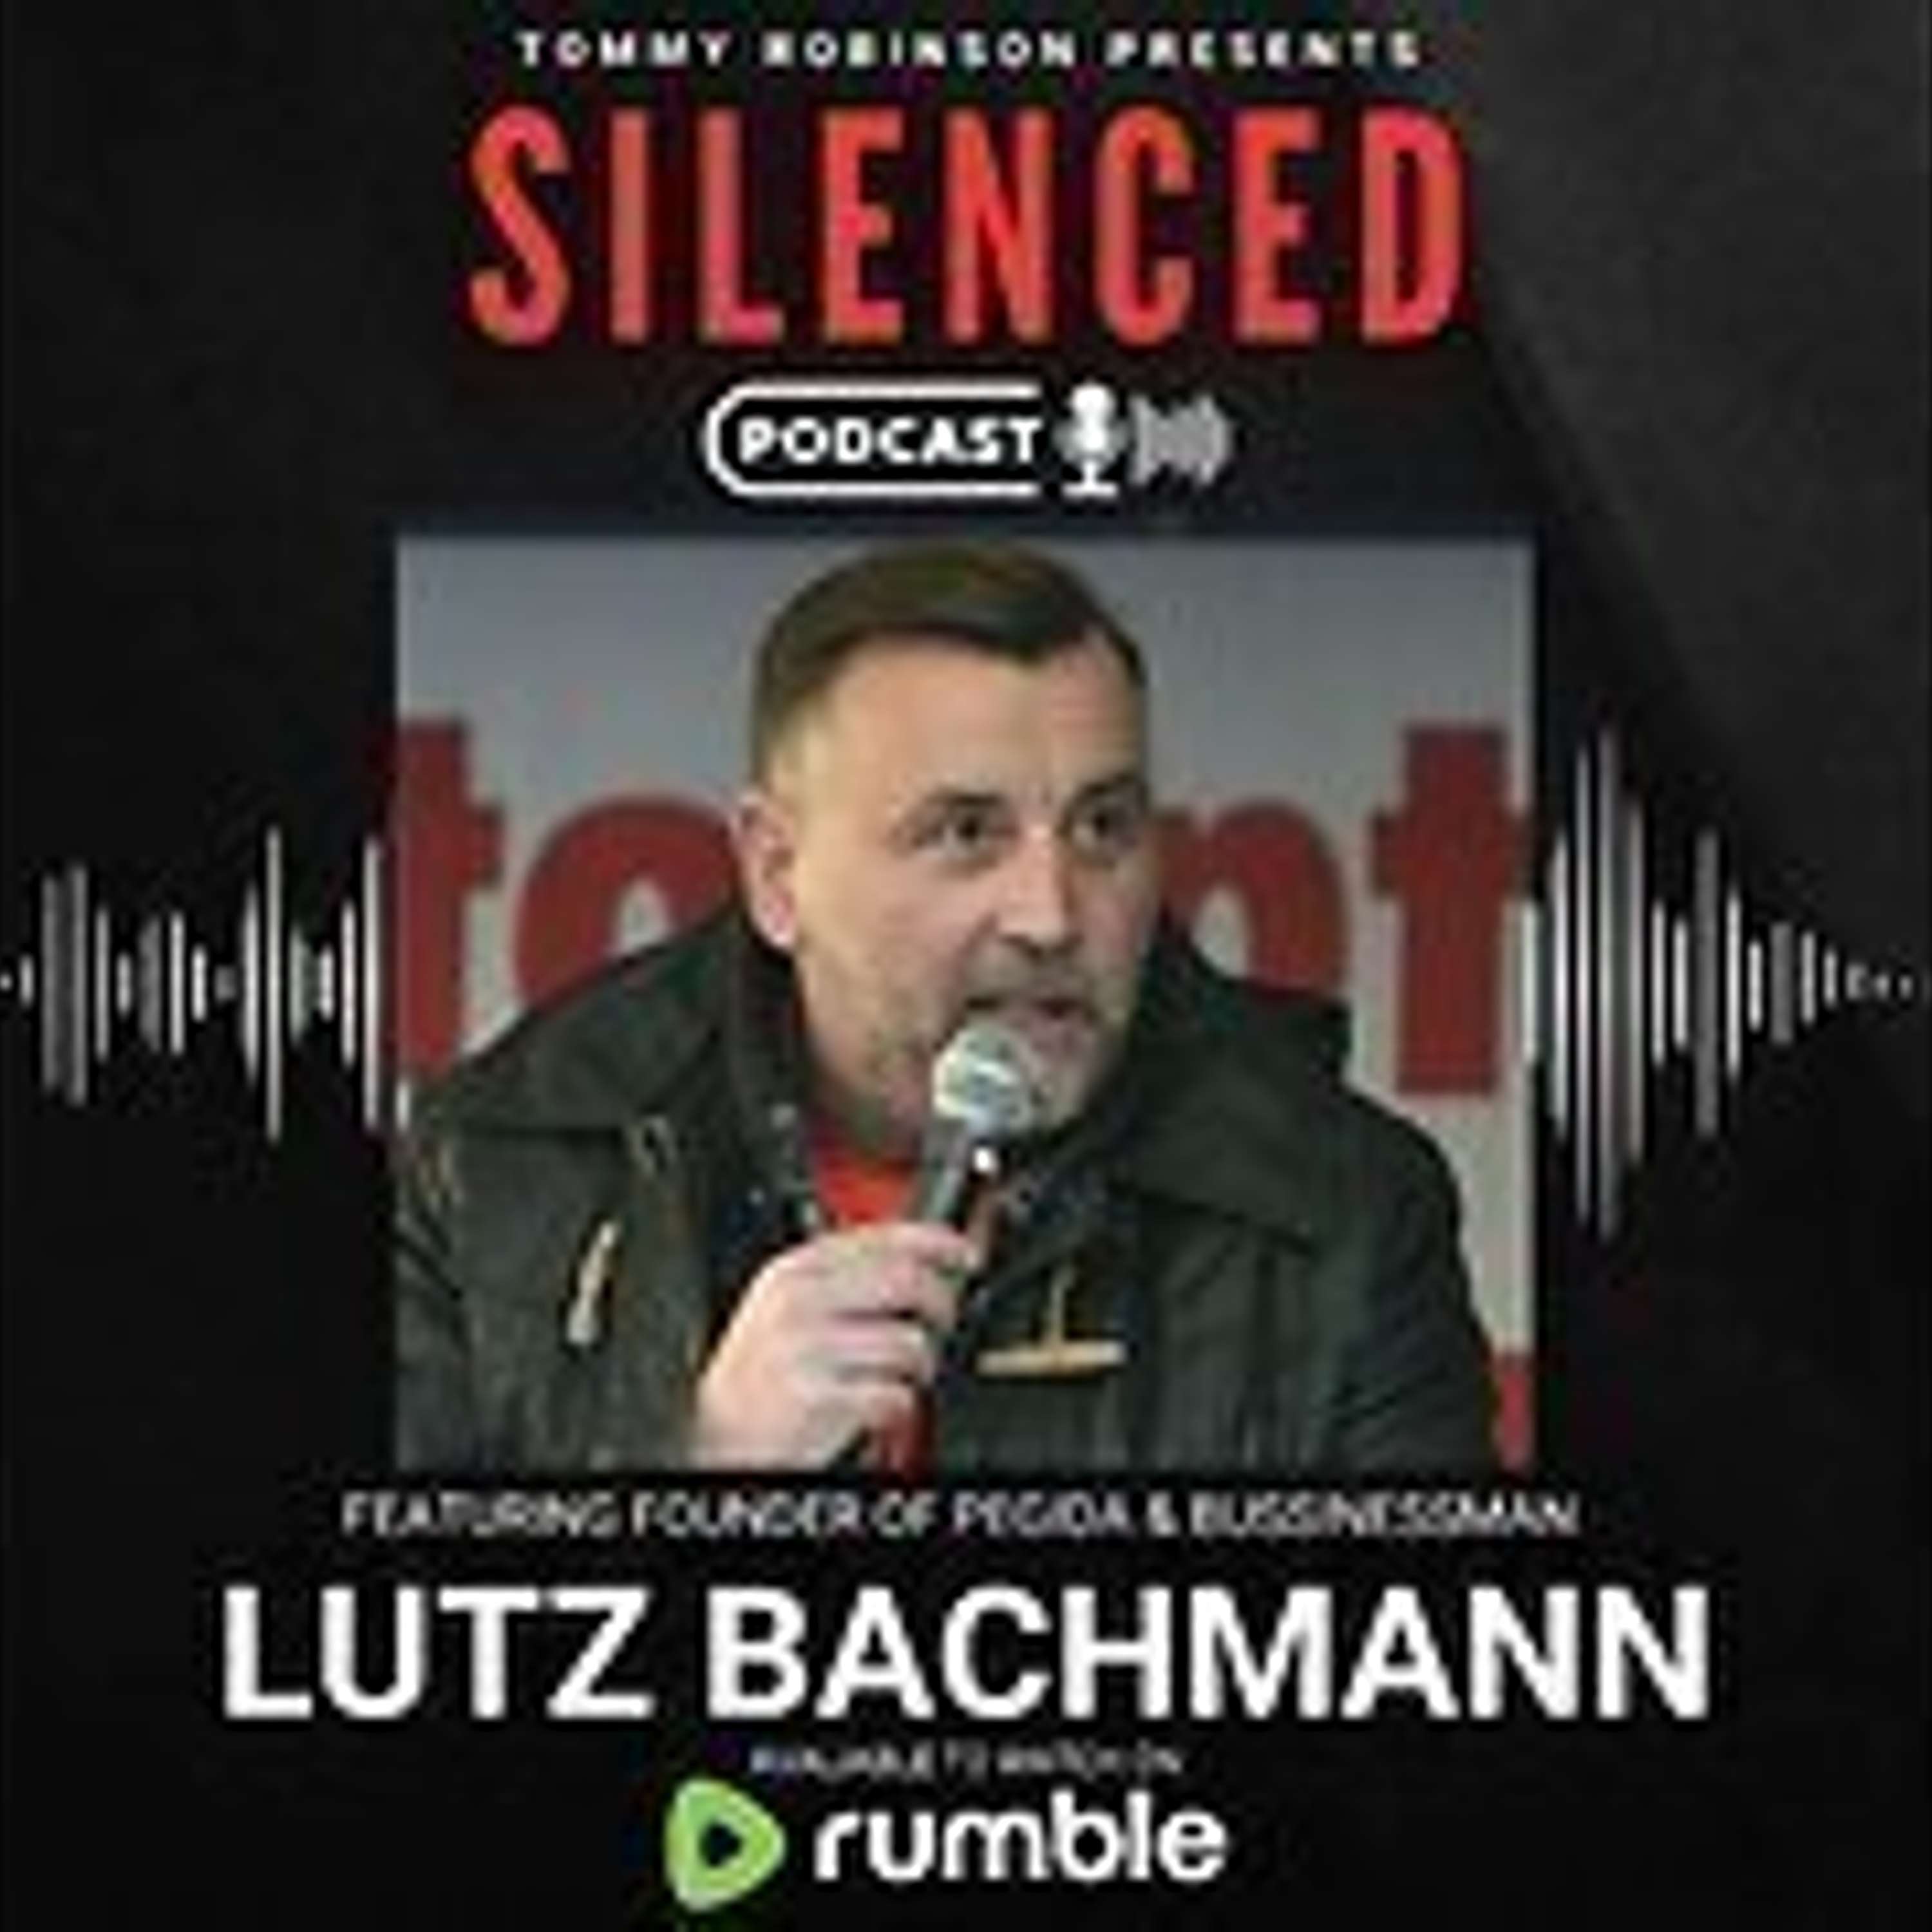 Episode 29 - SILENCED with Tommy Robinson - Lutz Bachmann